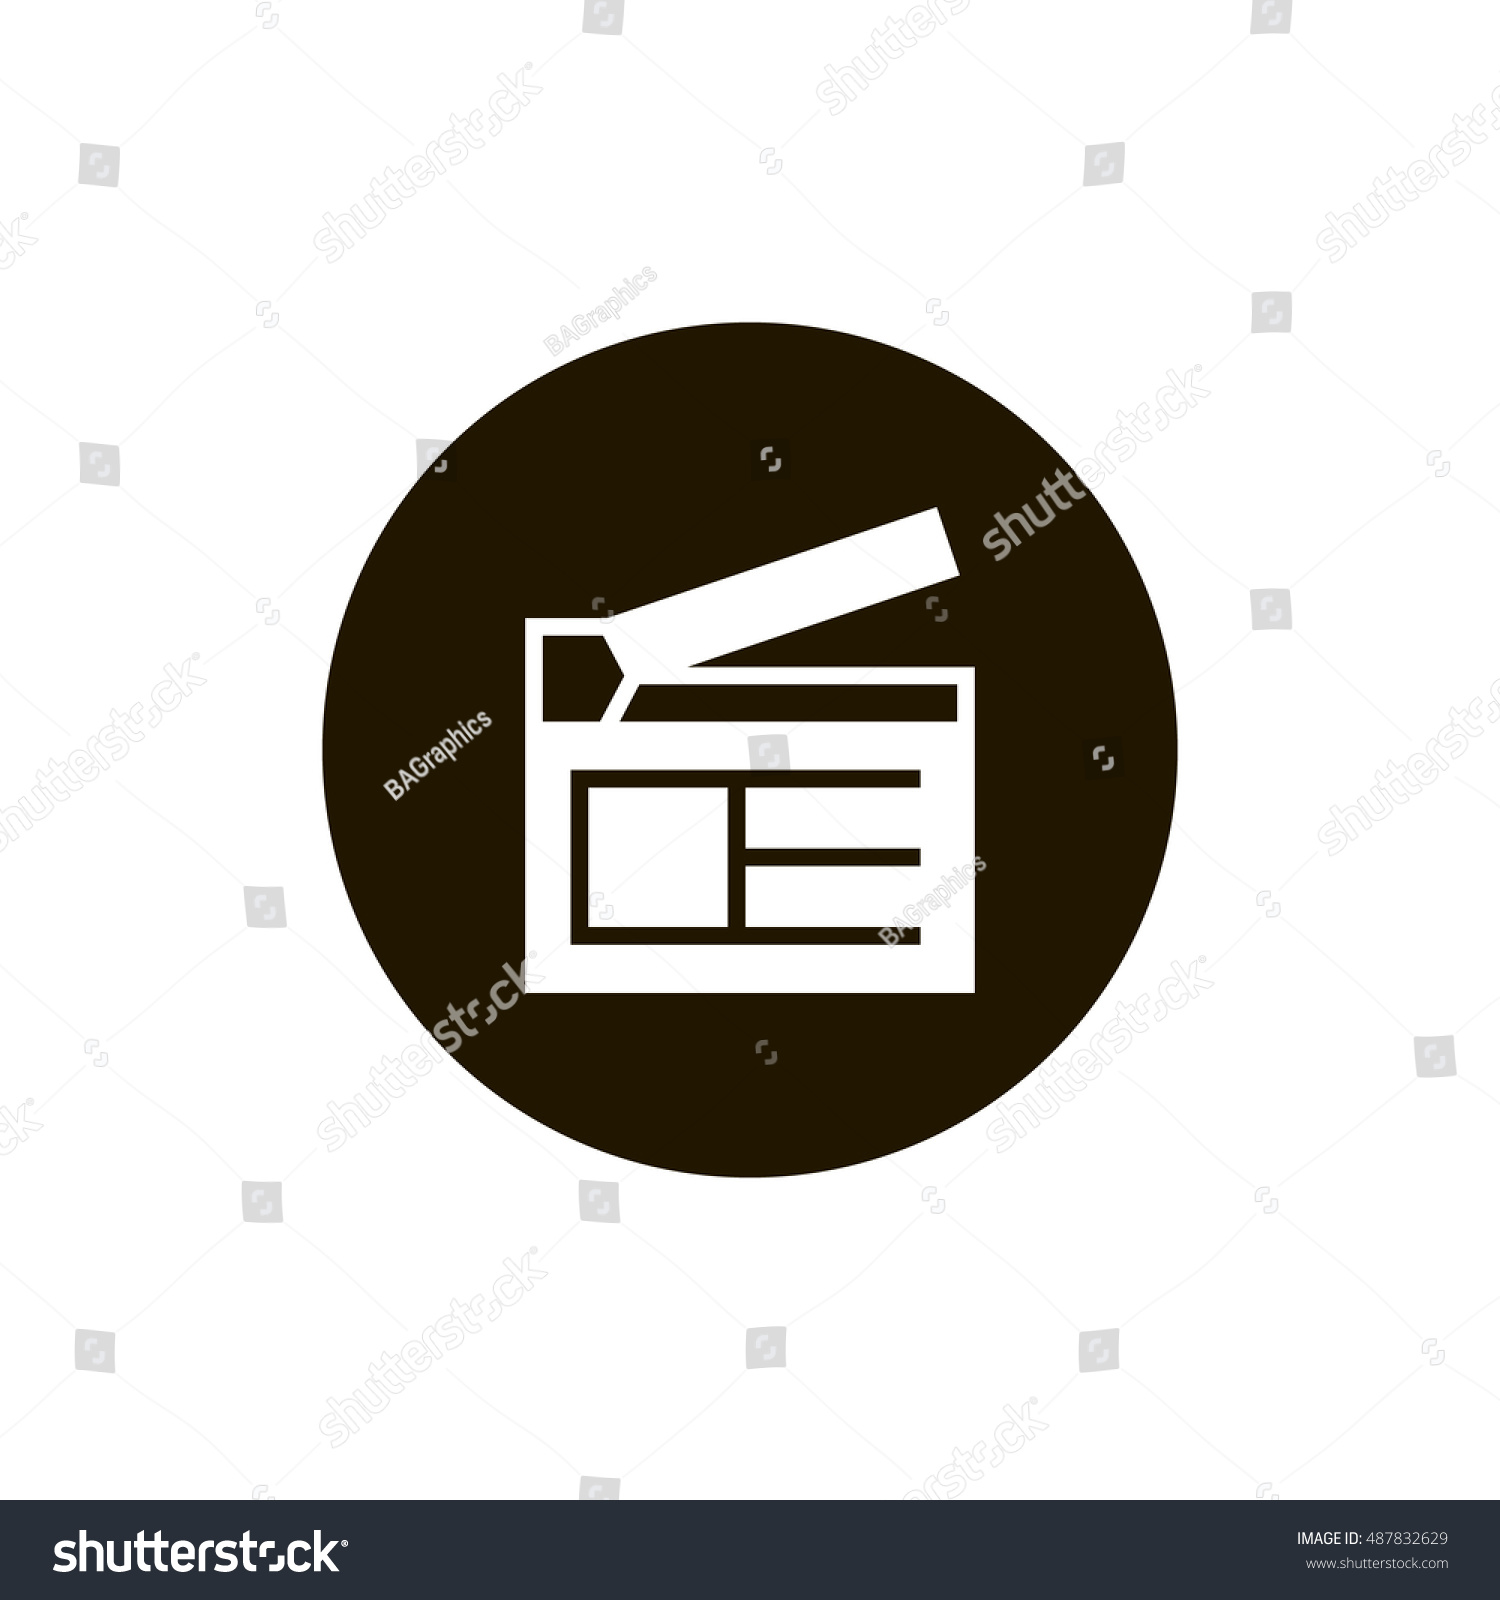 SVG of Clapperboard icon vector, clip art. Also useful as logo, circle app icon, web UI element, symbol, graphic image, silhouette and illustration. Compatible with ai, cdr, jpg, png, svg, pdf, ico and eps. svg